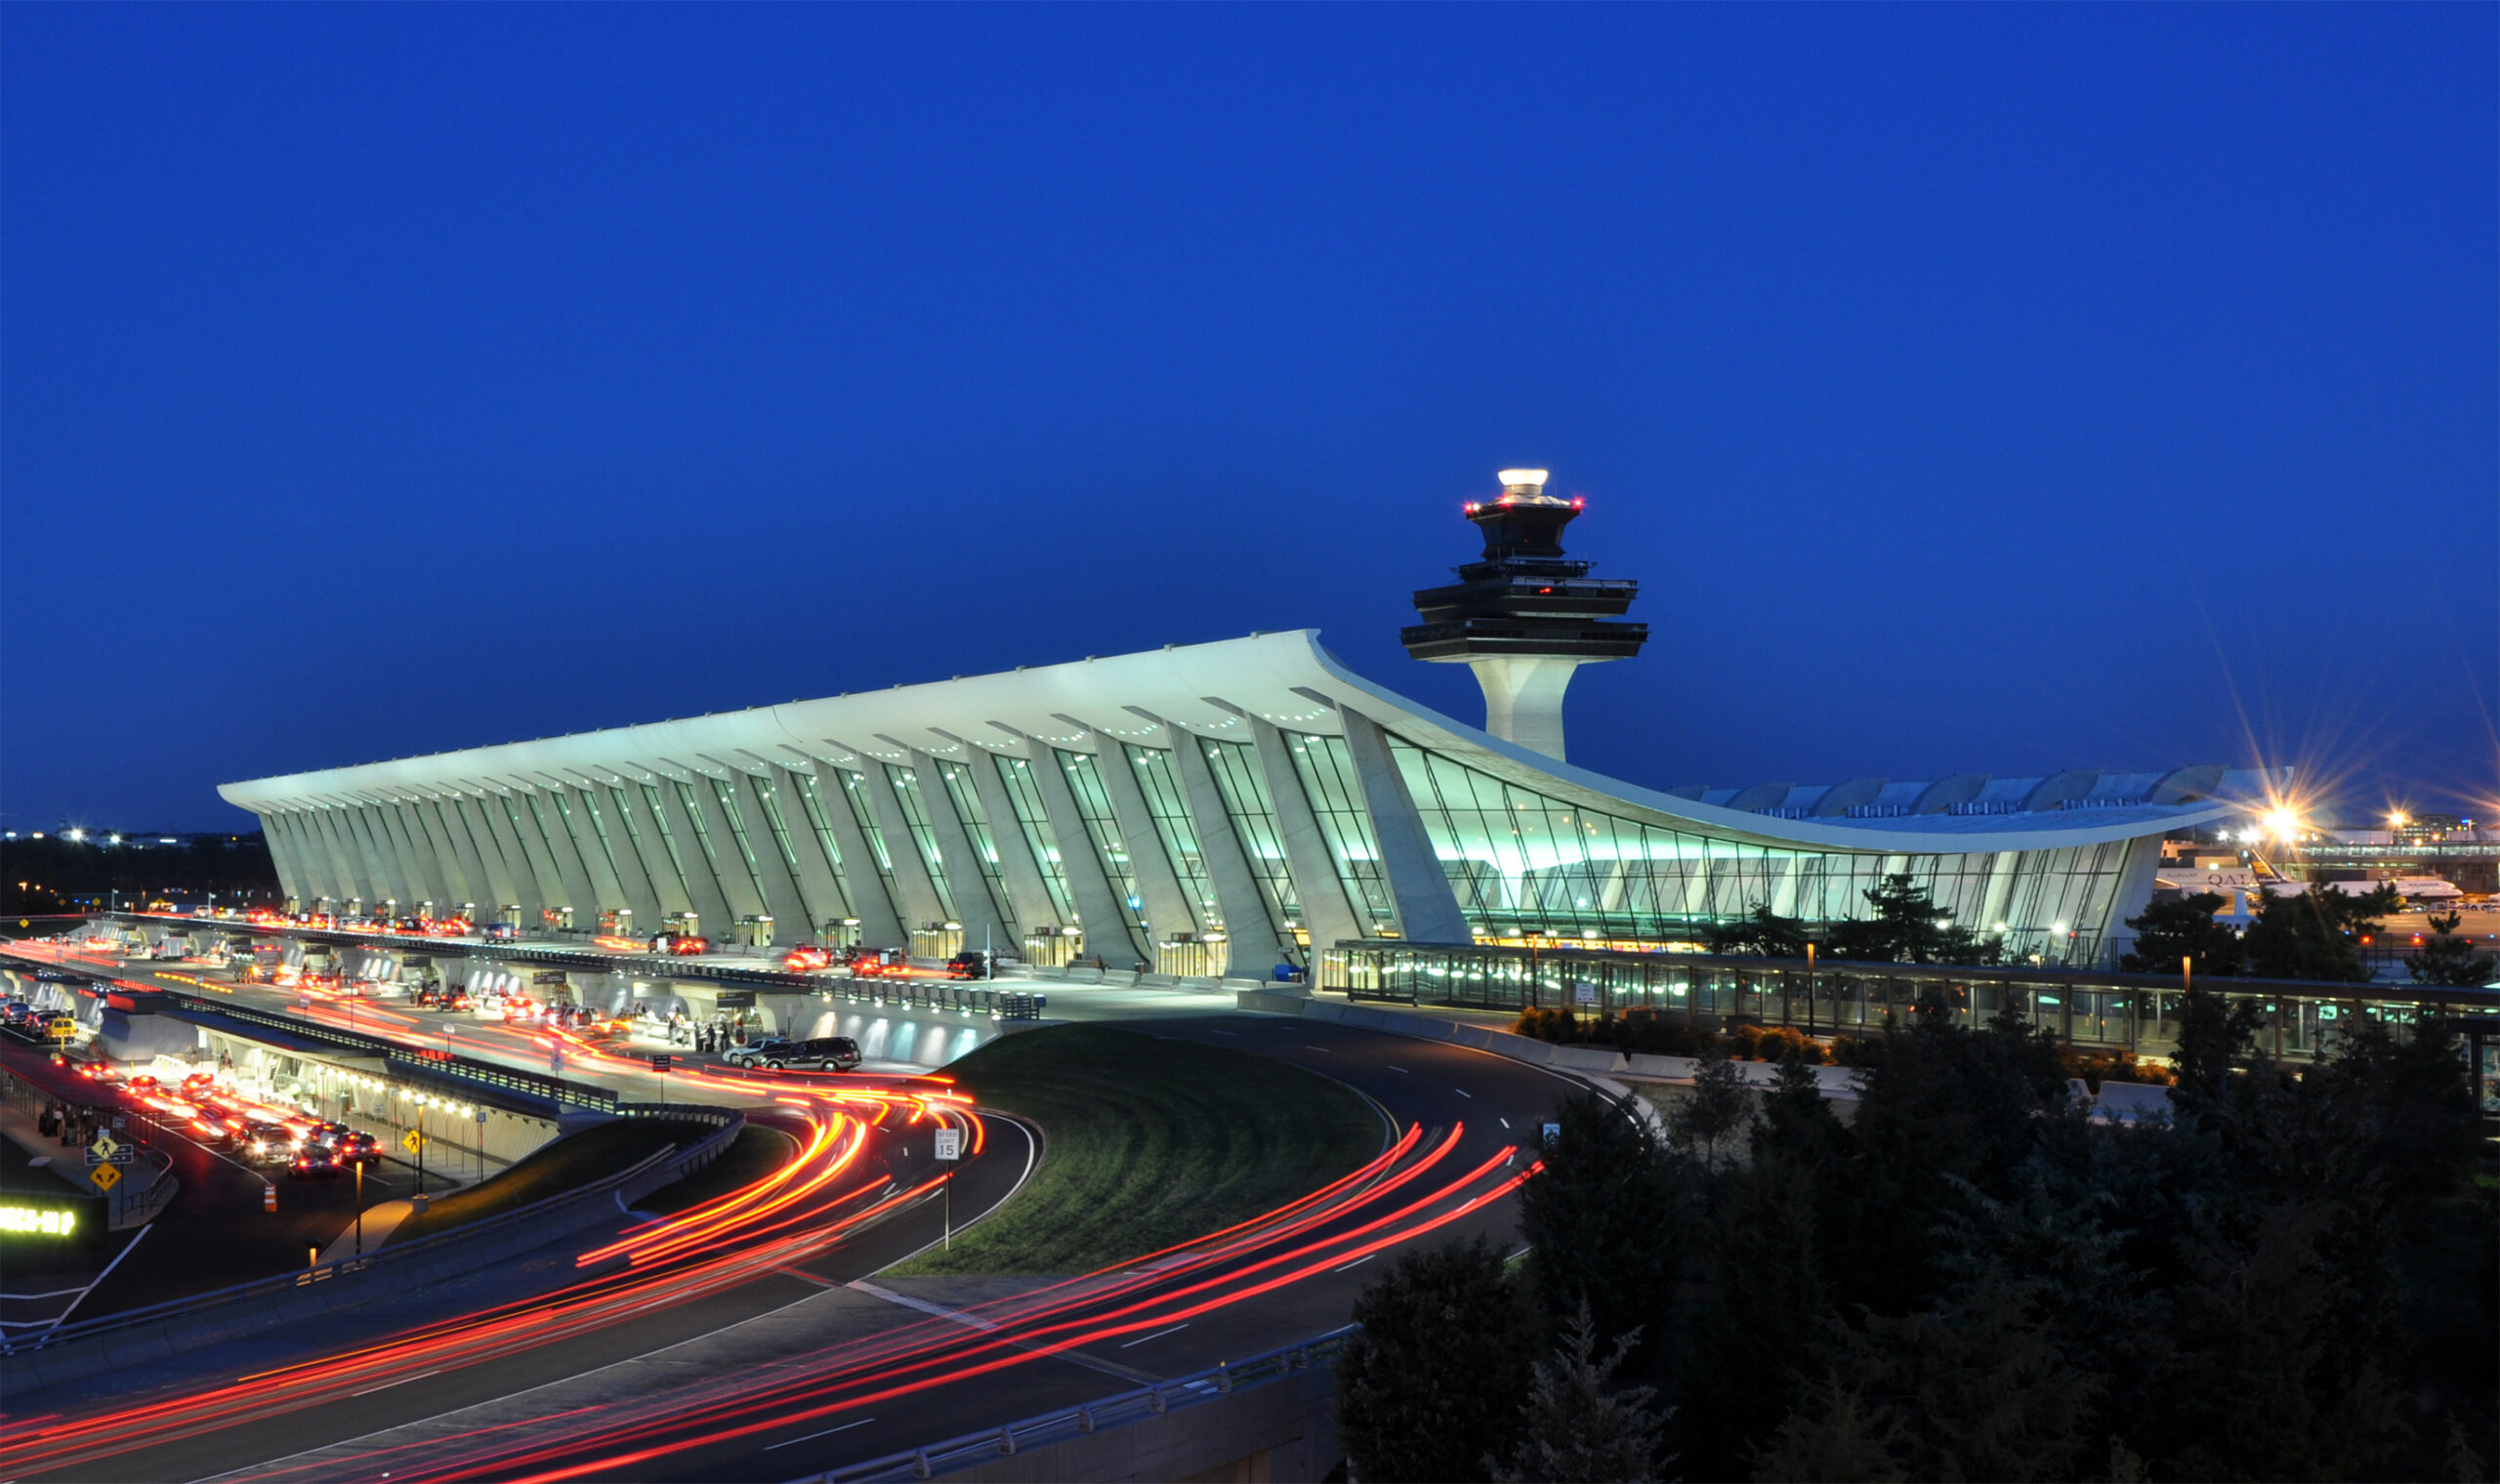 Why is Dulles called IAD?